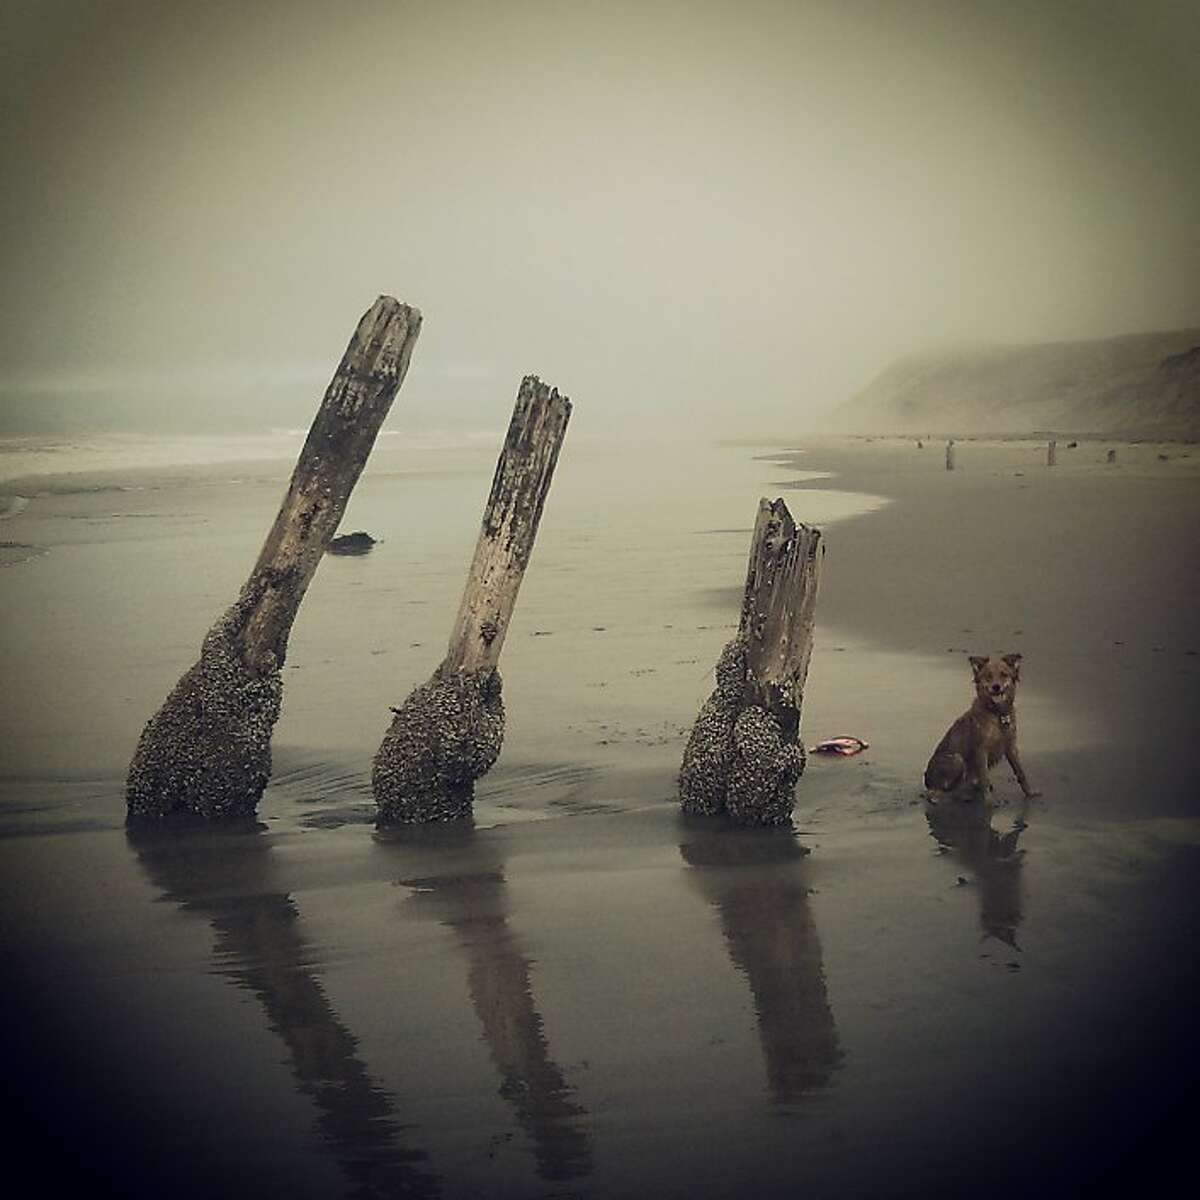 From the photographer: "On a drizzly Wednesday at Fort Funston the fog was so thick that I lost track of the path that leads down the sandy log-and-cable staircase, and my dog Foxy and I ended up farther down the beach than we normally go. The beach was deserted, so these pier remnants seemed especially eerie as they emerged from the mist. Foxy took a break from scampering paw-print-sine-waves in and out of the surf just long enough for me to snap this photo. I quickly took a second snapshot for good measure, but by then she'd snapped up her Frisbee and was just a blur of orange fur streaking out of the frame." @barbieyoga